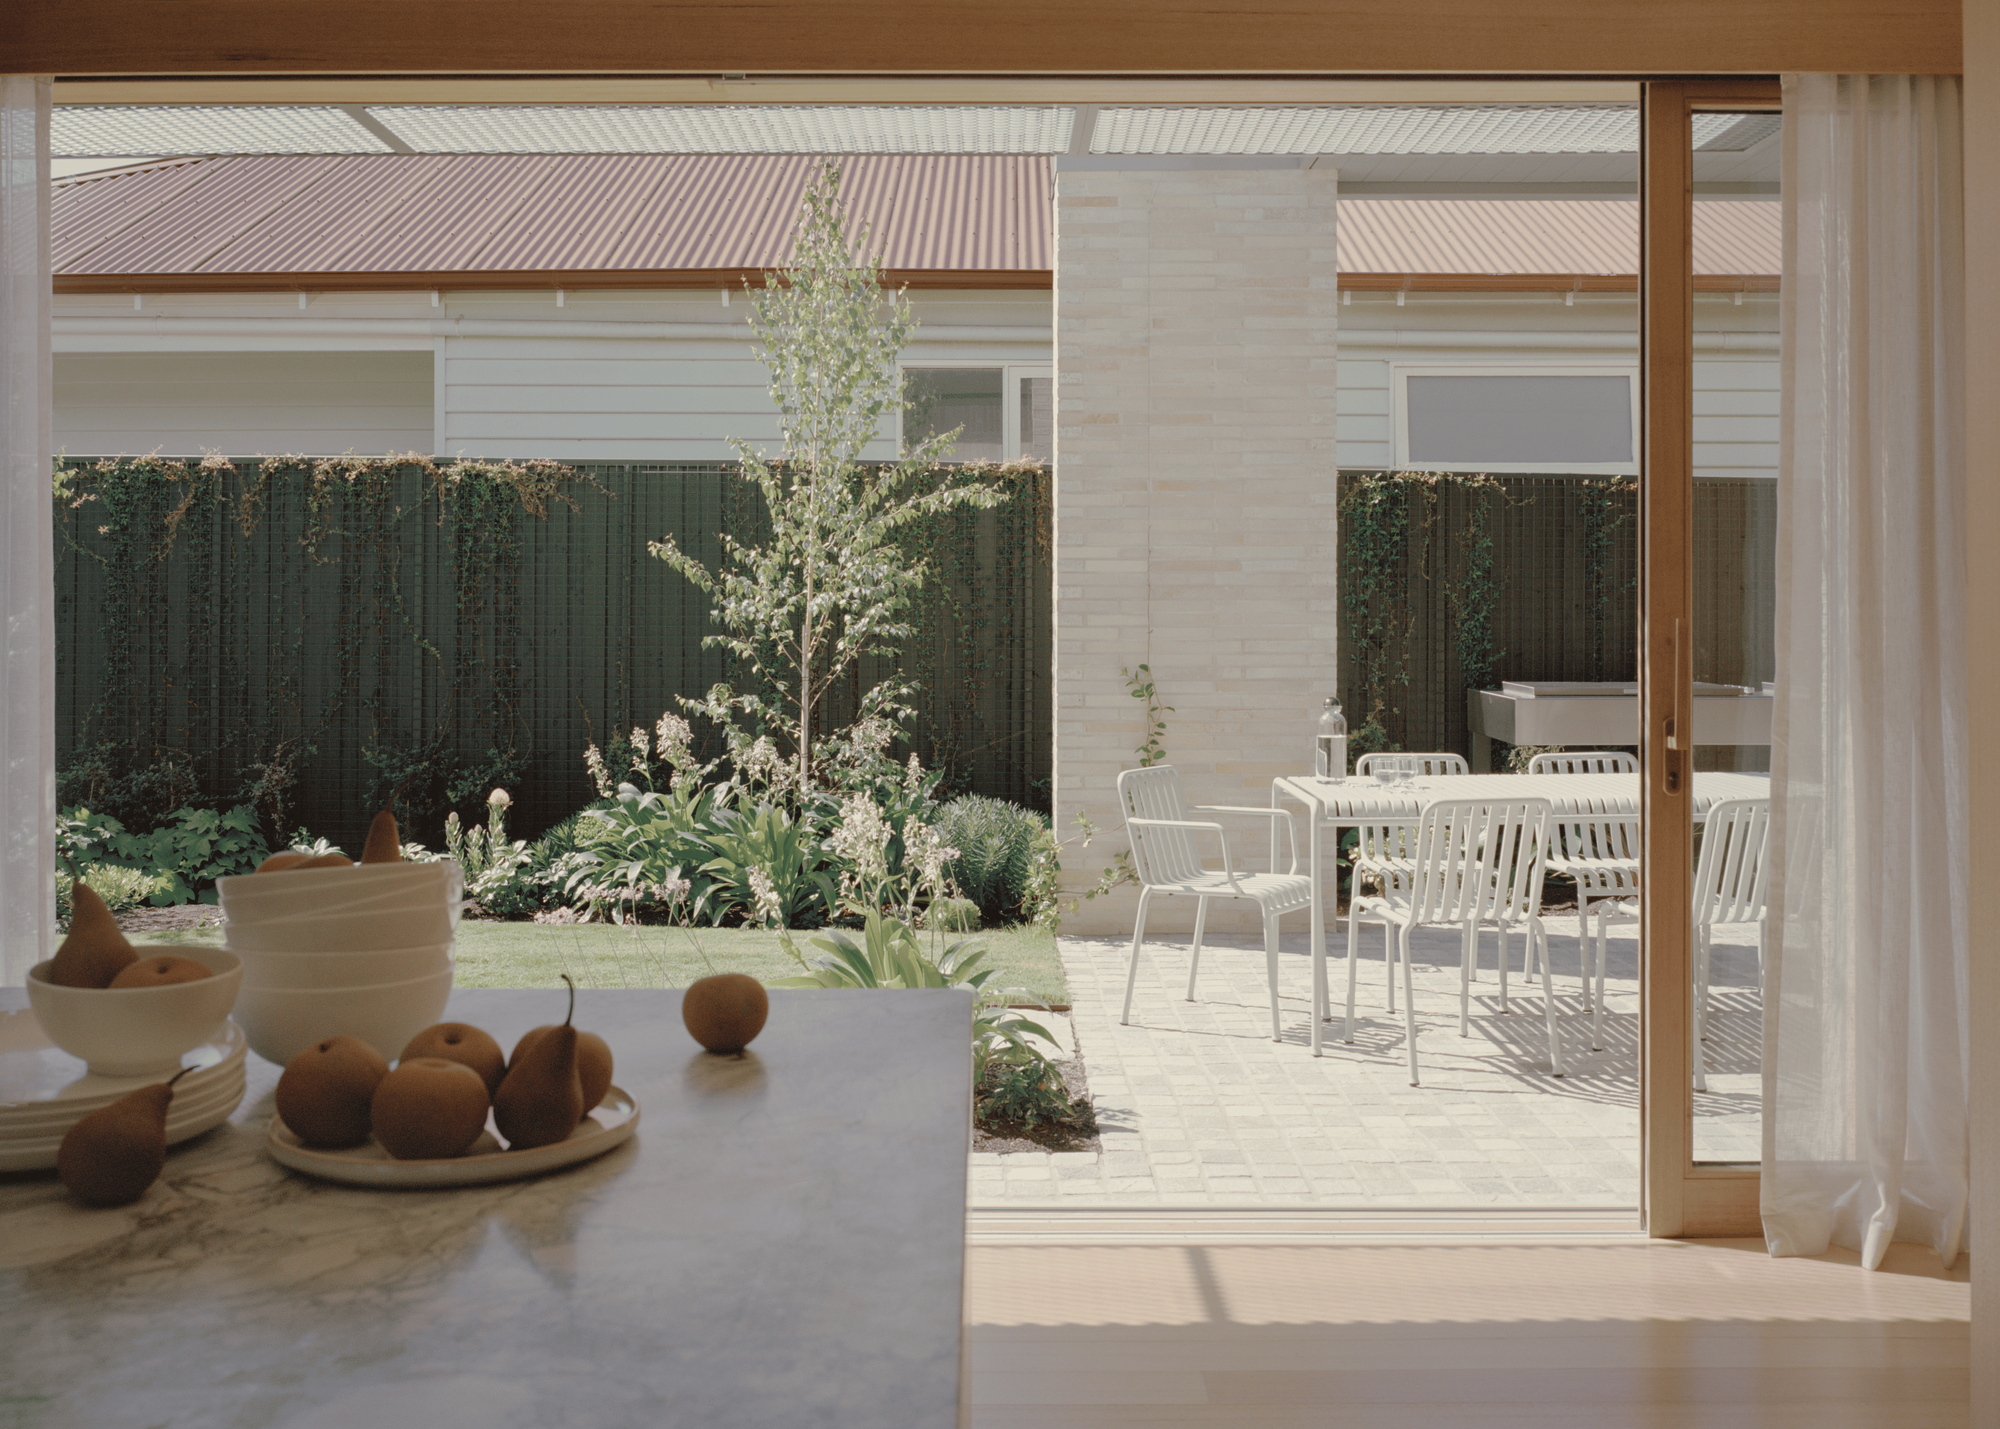 Gable Park by Weaver+Co Architects. Photography by Tasha Tylee. Second floor of home visible through foliage. 